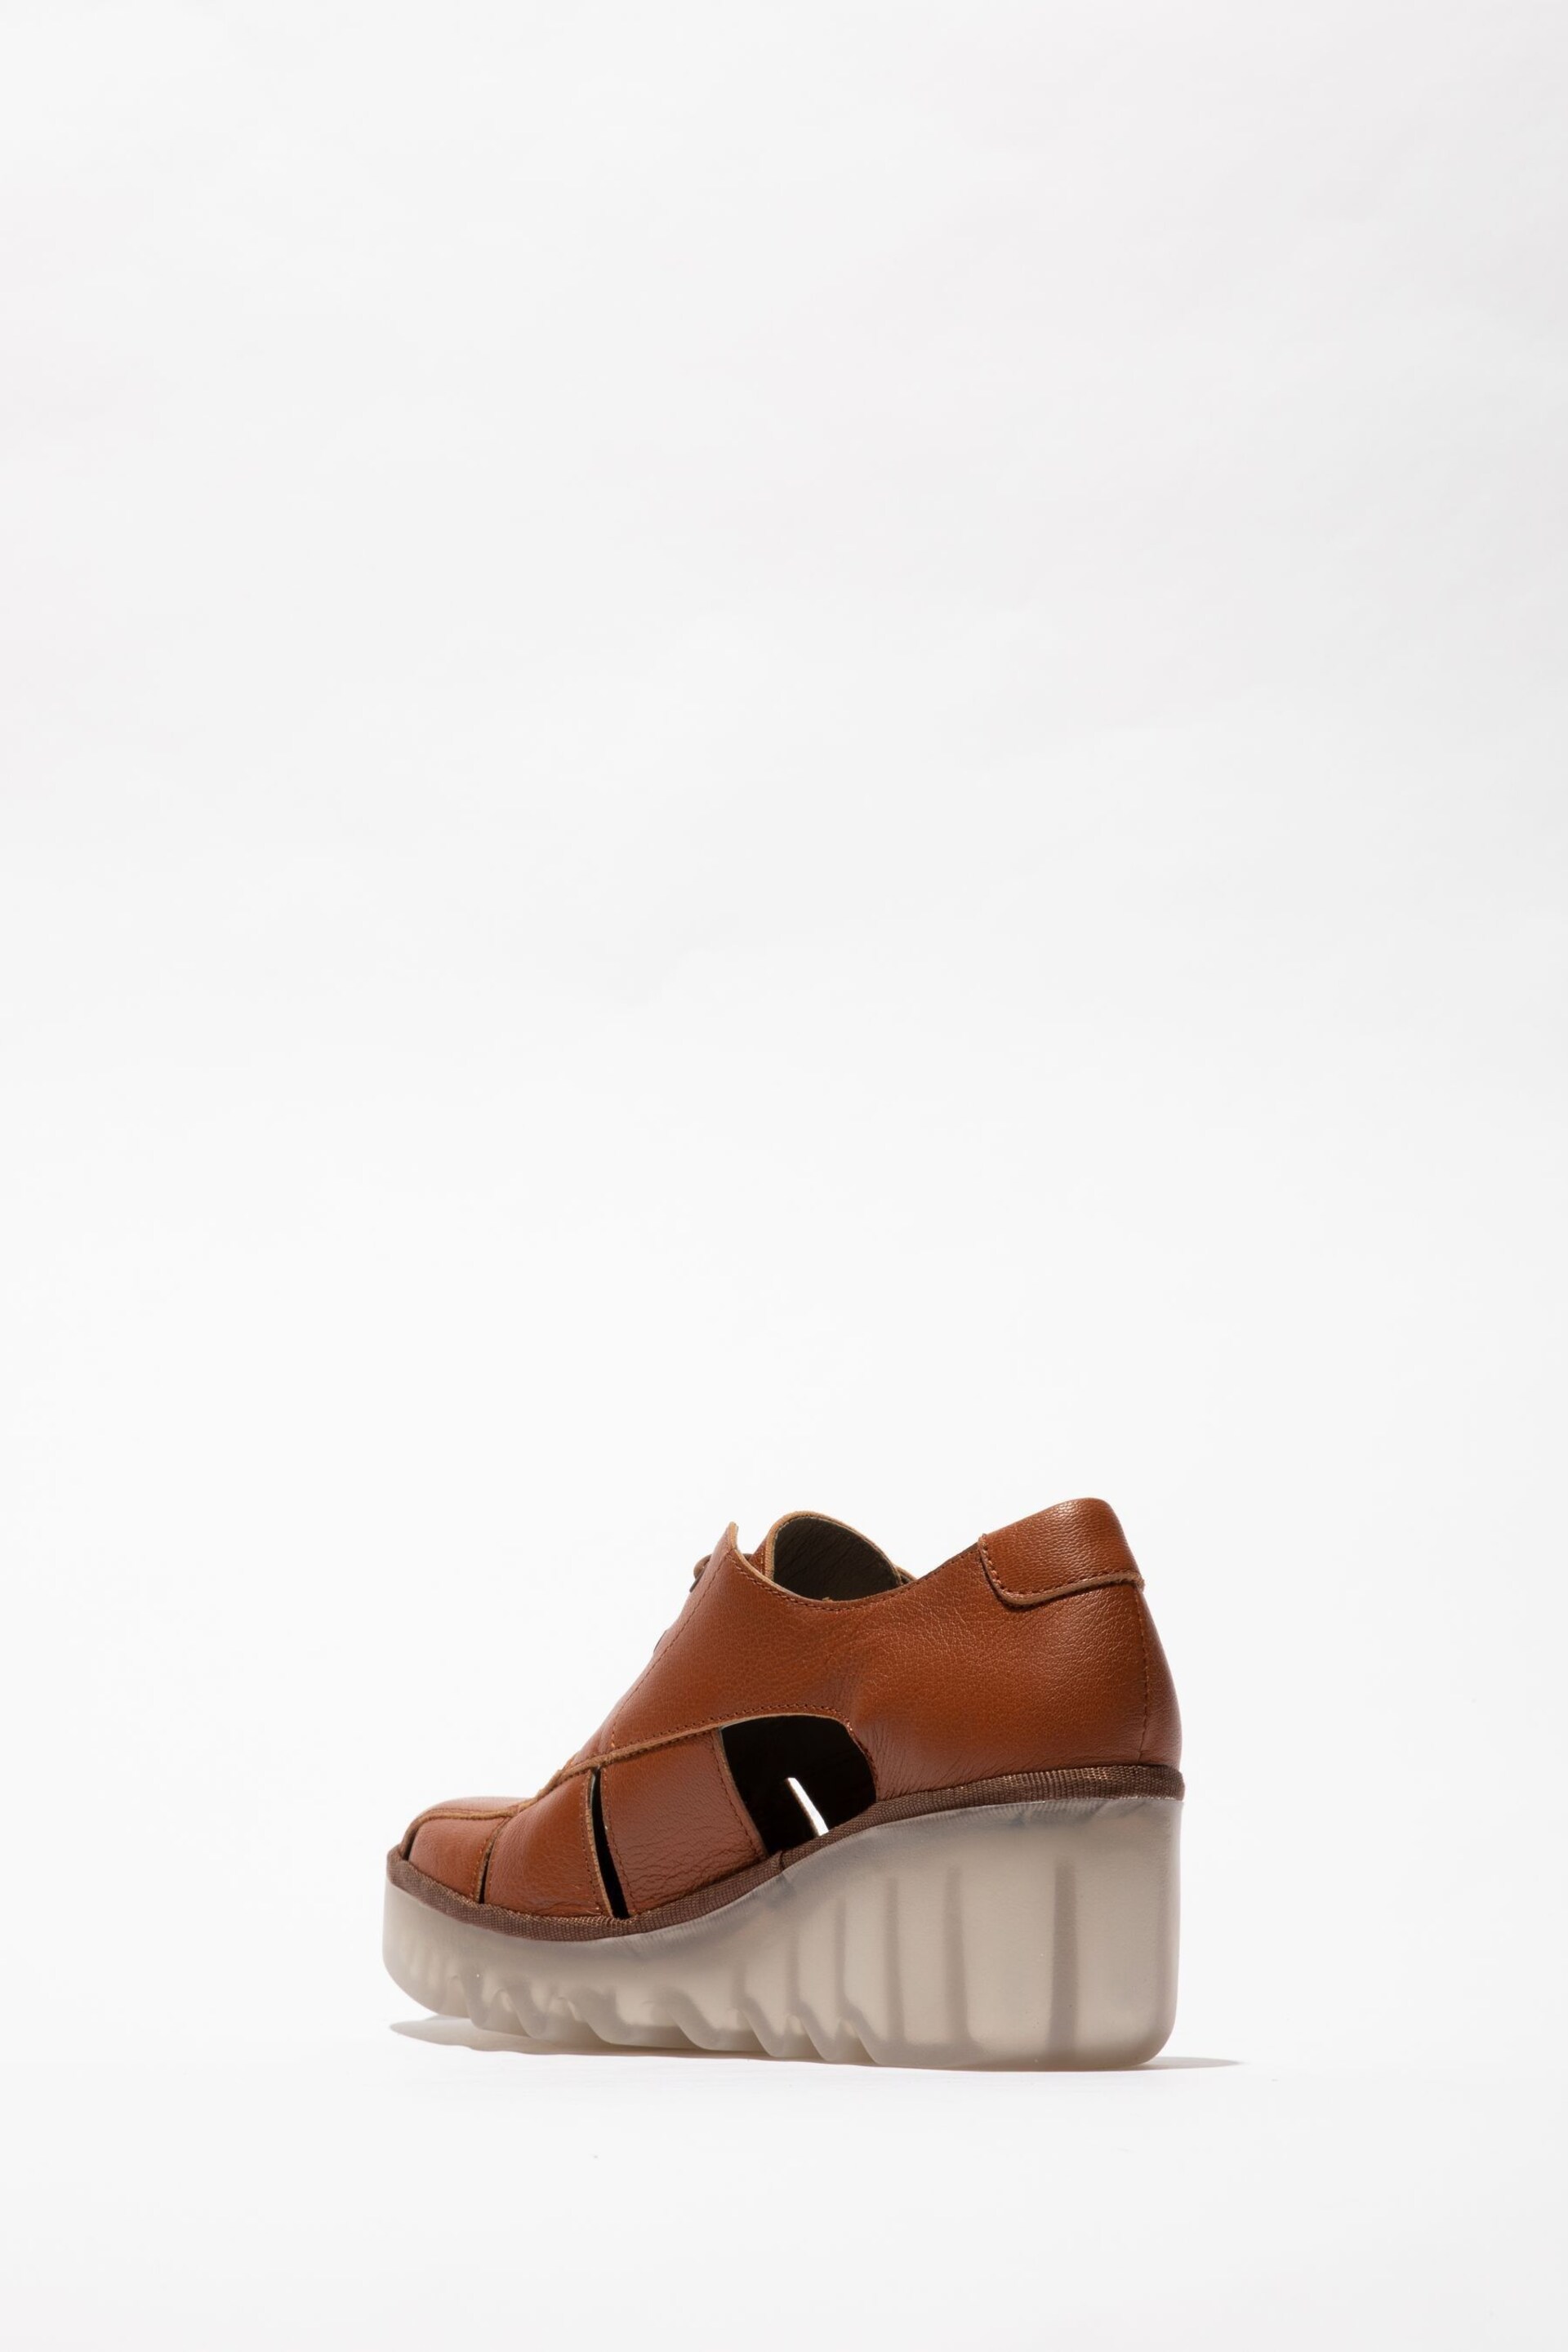 Fly London Bogi Brown Shoes - Image 2 of 4